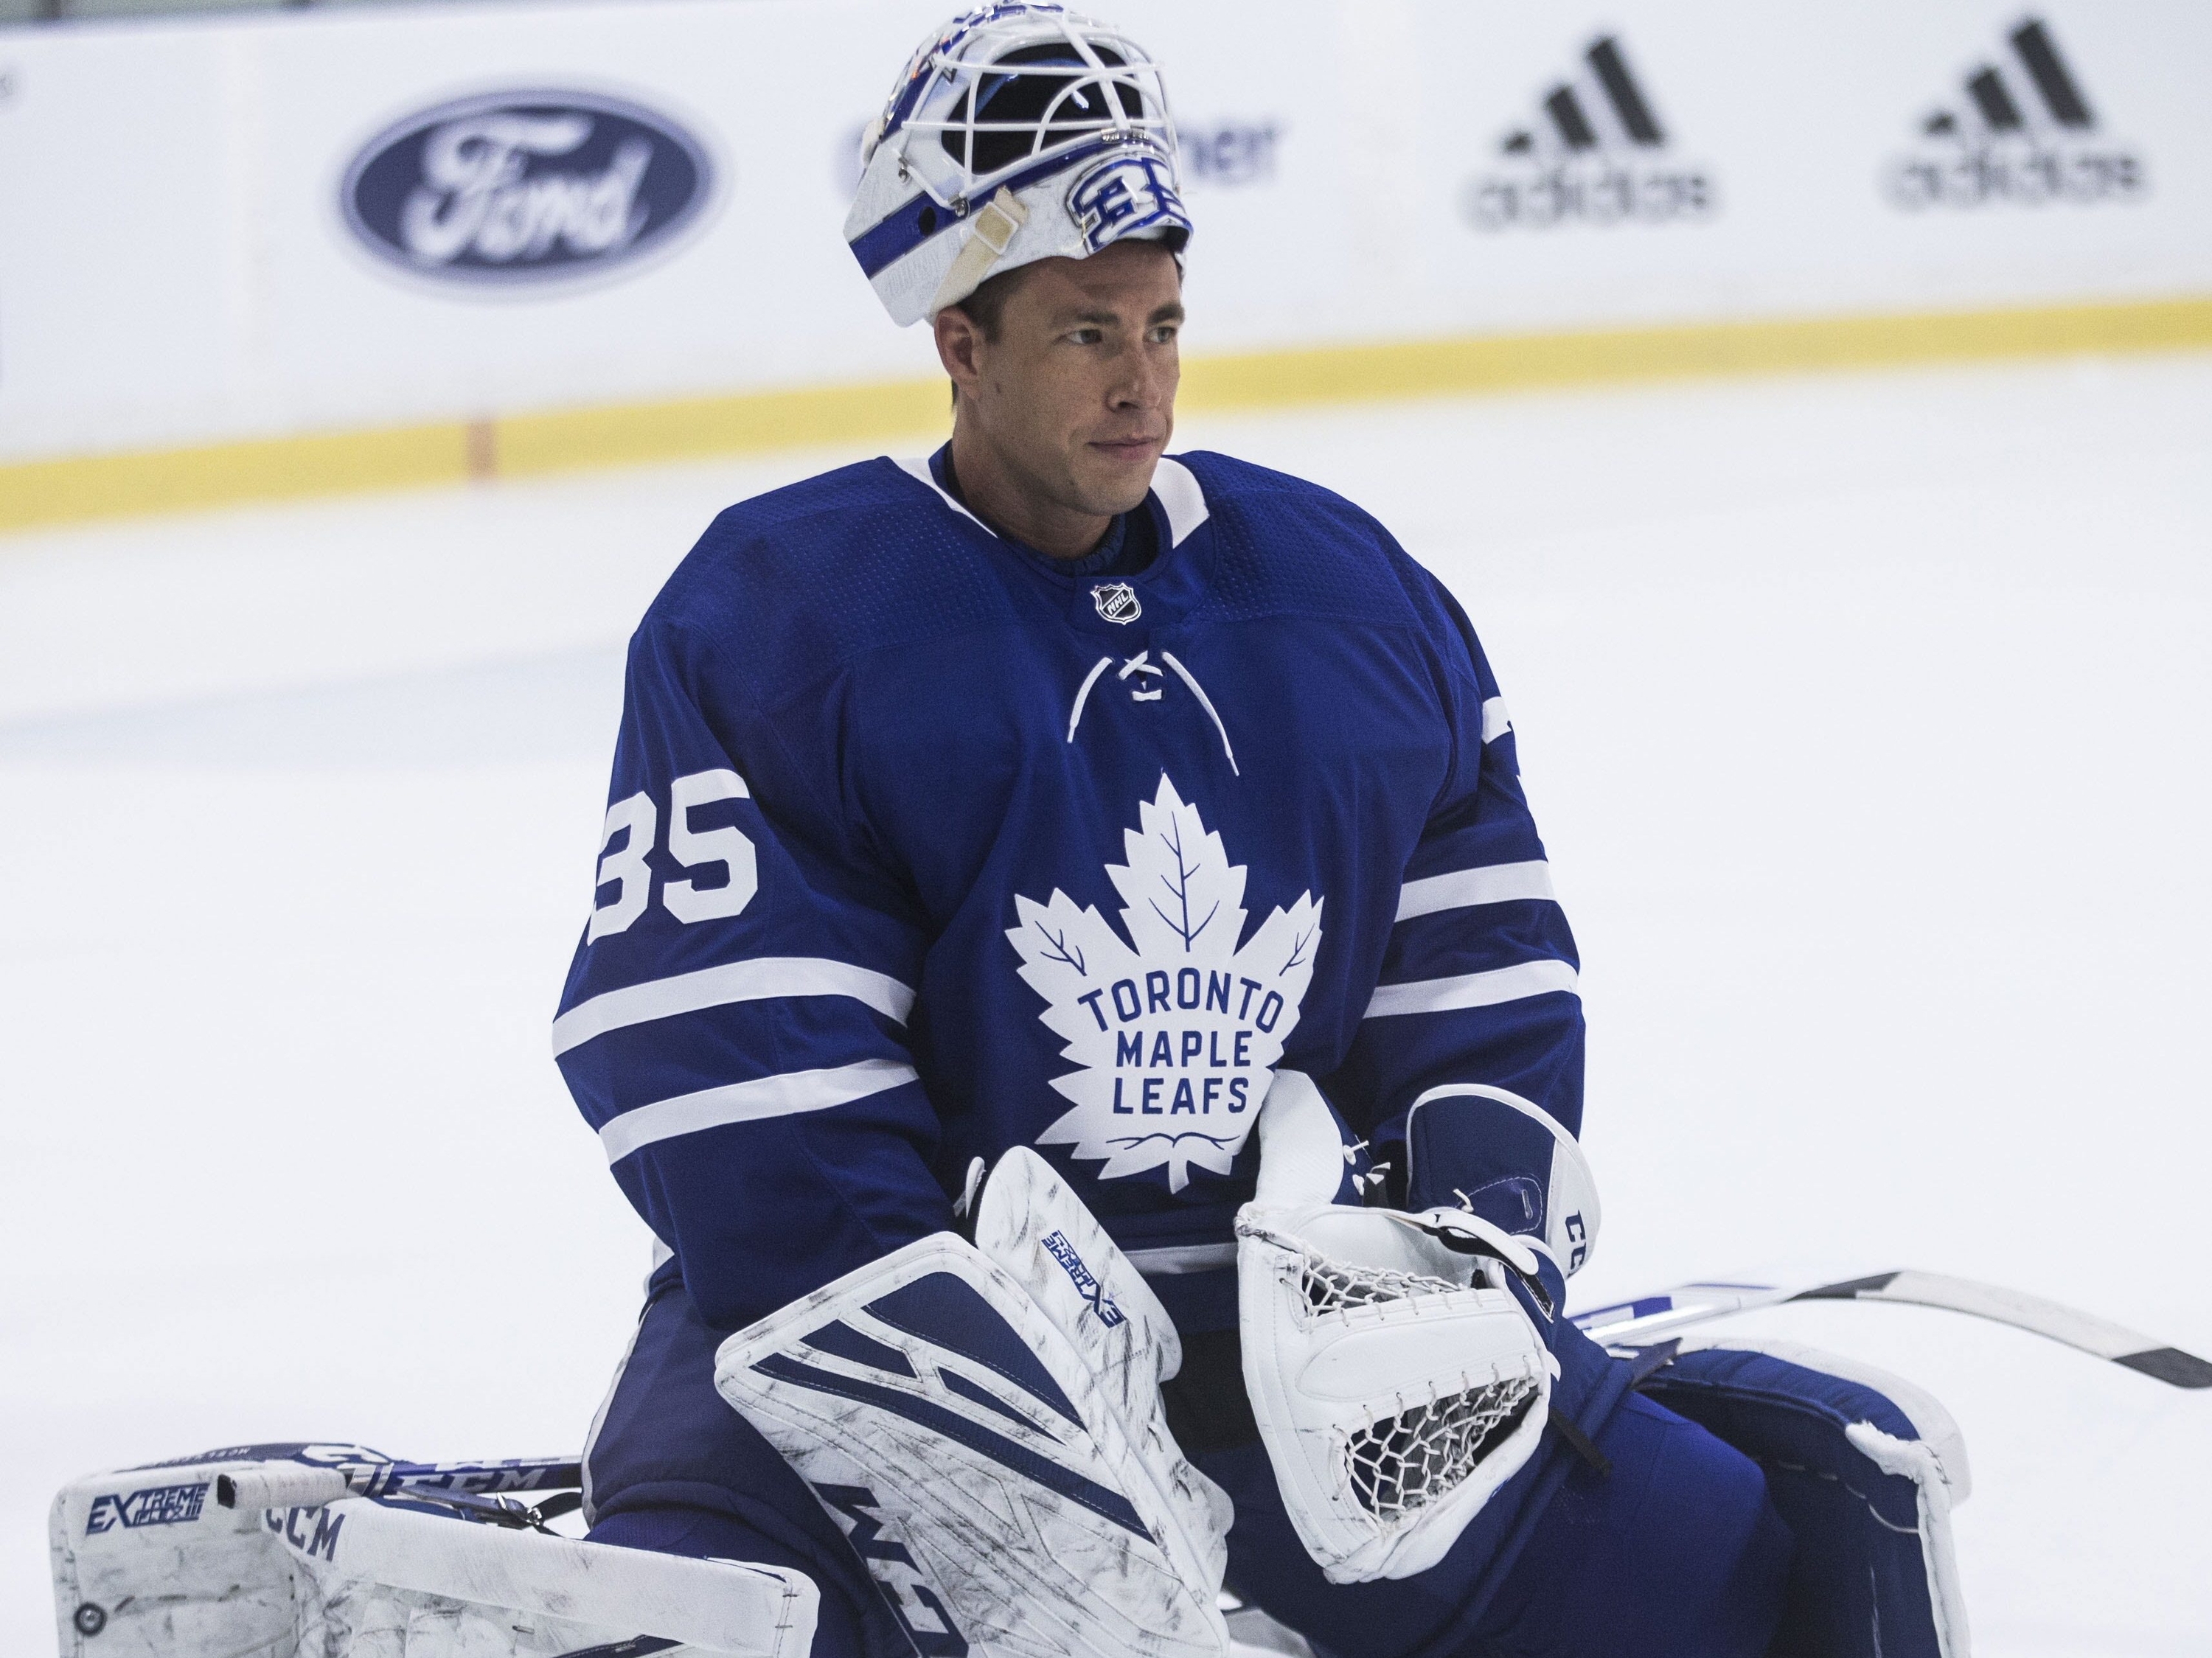 Player photos for the 2018-19 Toronto Maple Leafs at